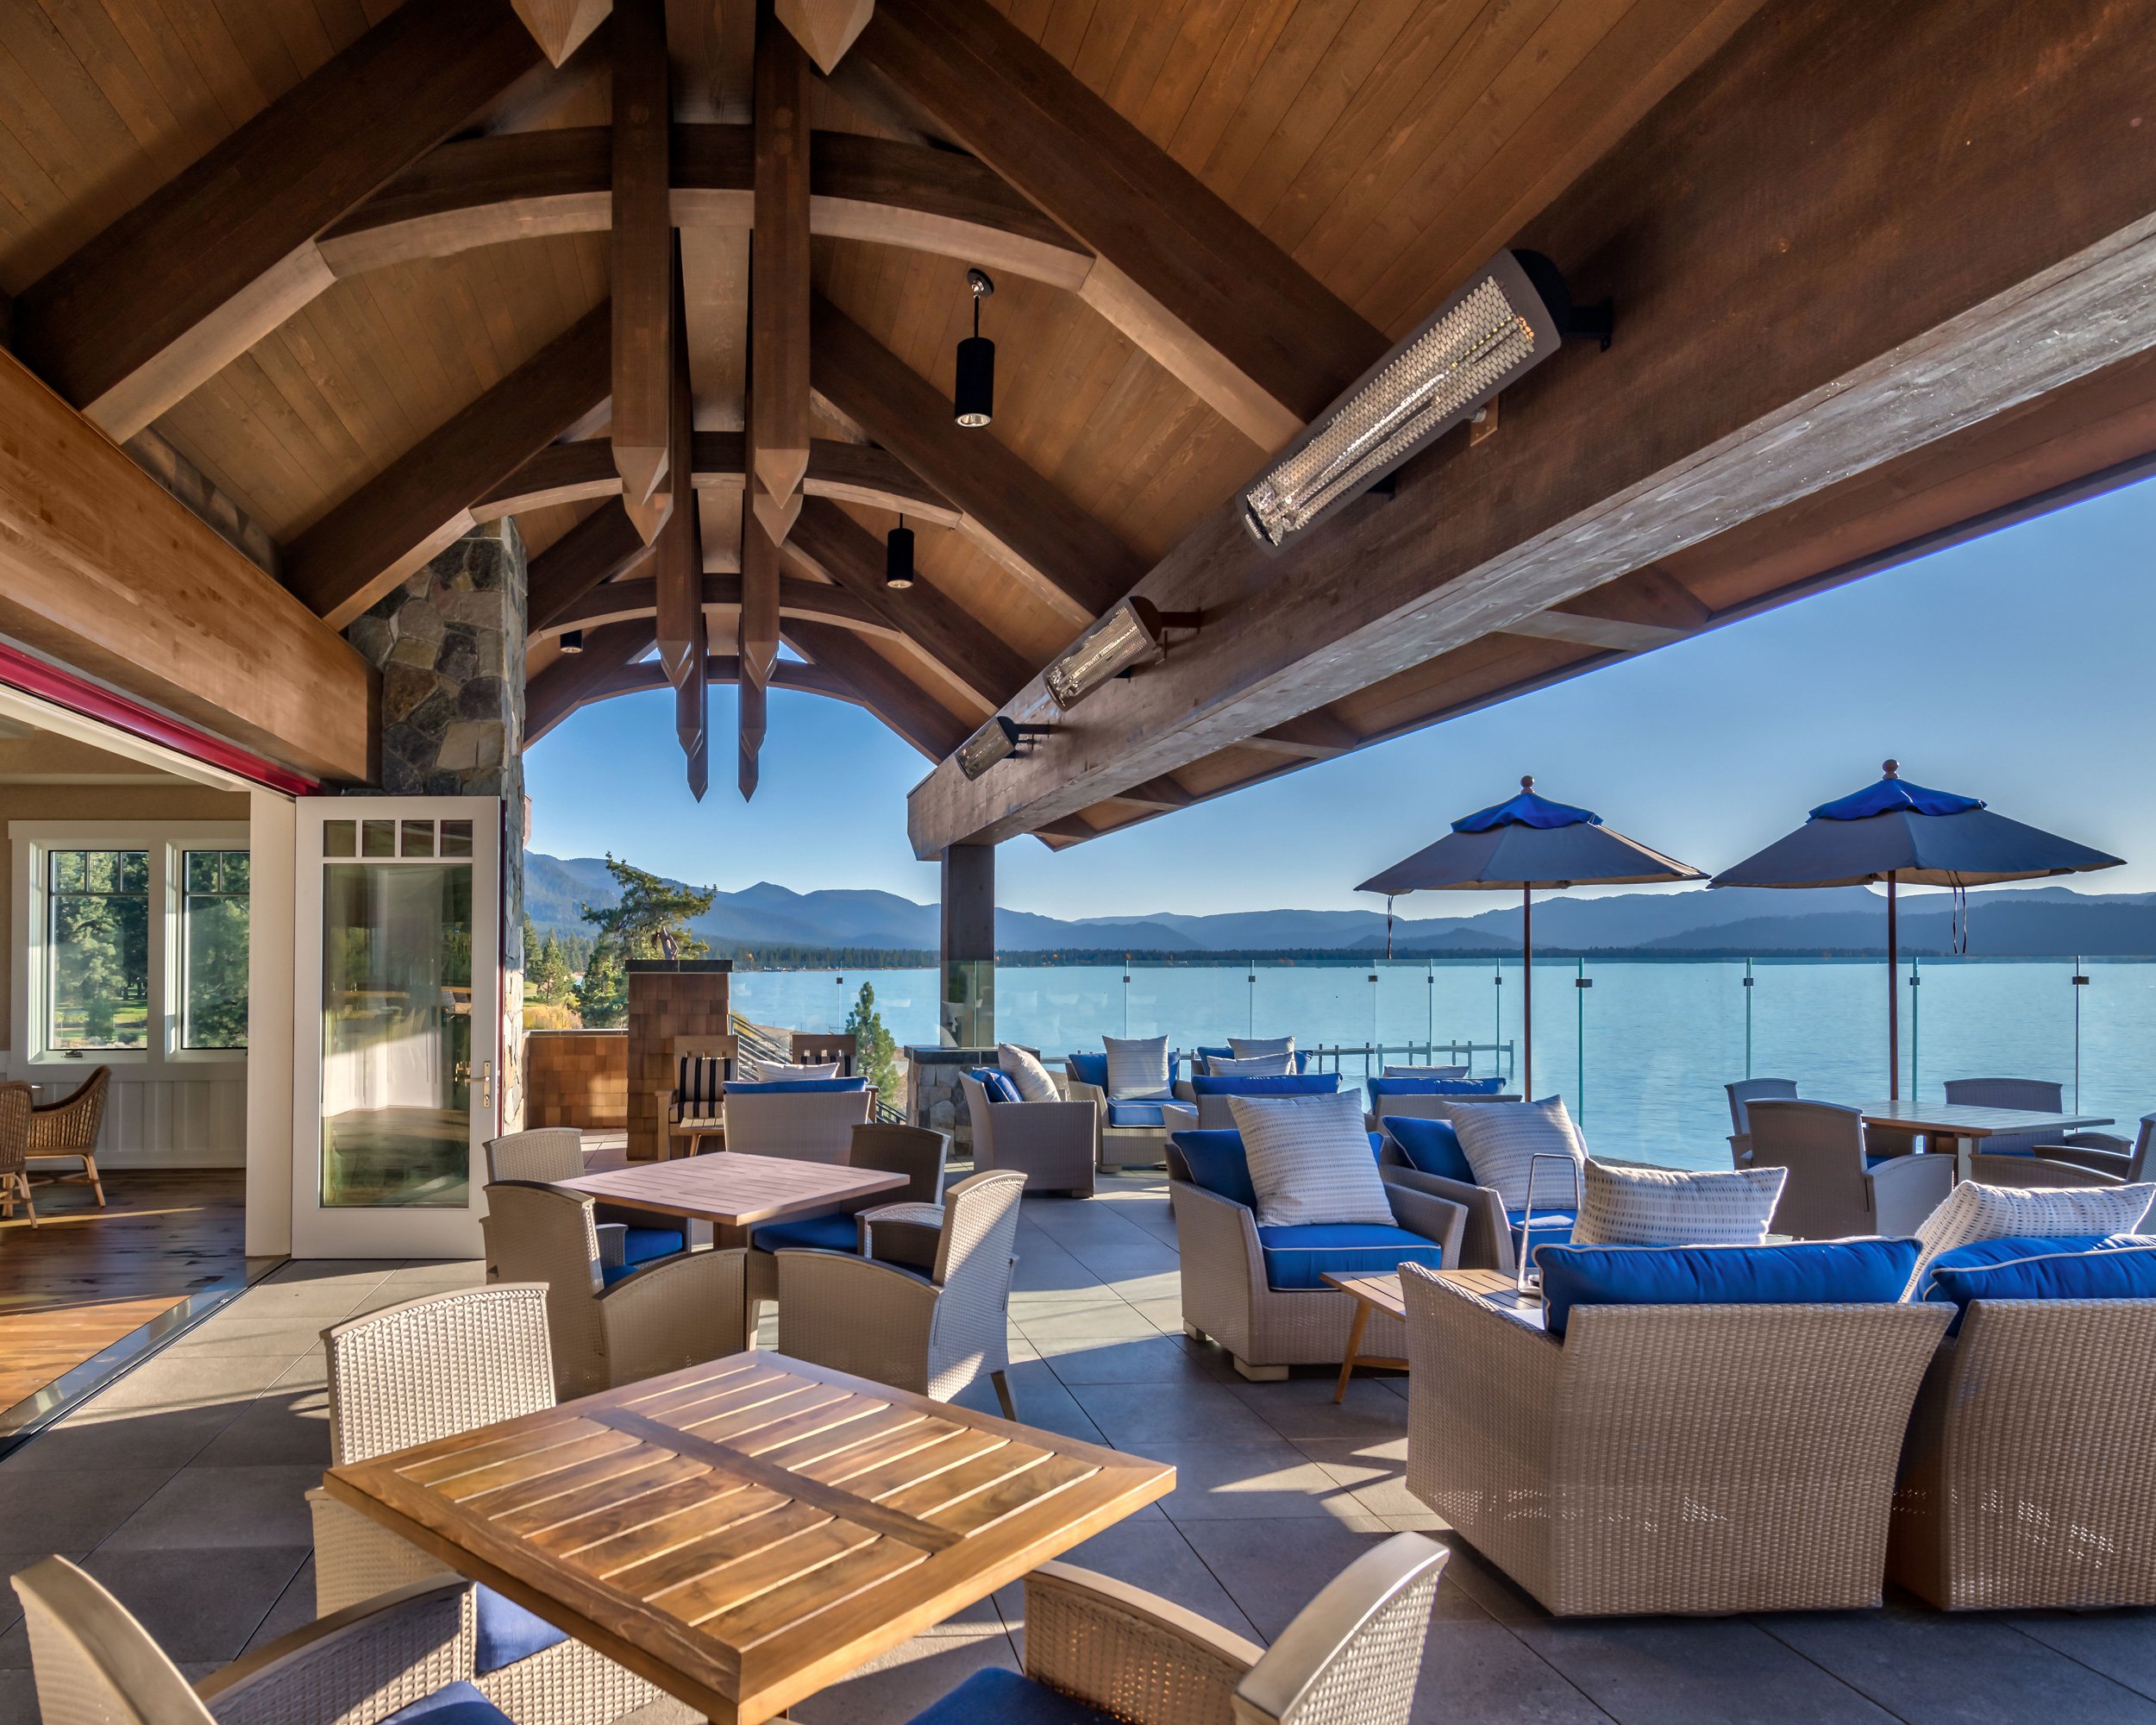 Tahoe Beach Club's serene lakefront patio with breathtaking view of the tranquil waters and surrounding nature. (Copy) (Copy)